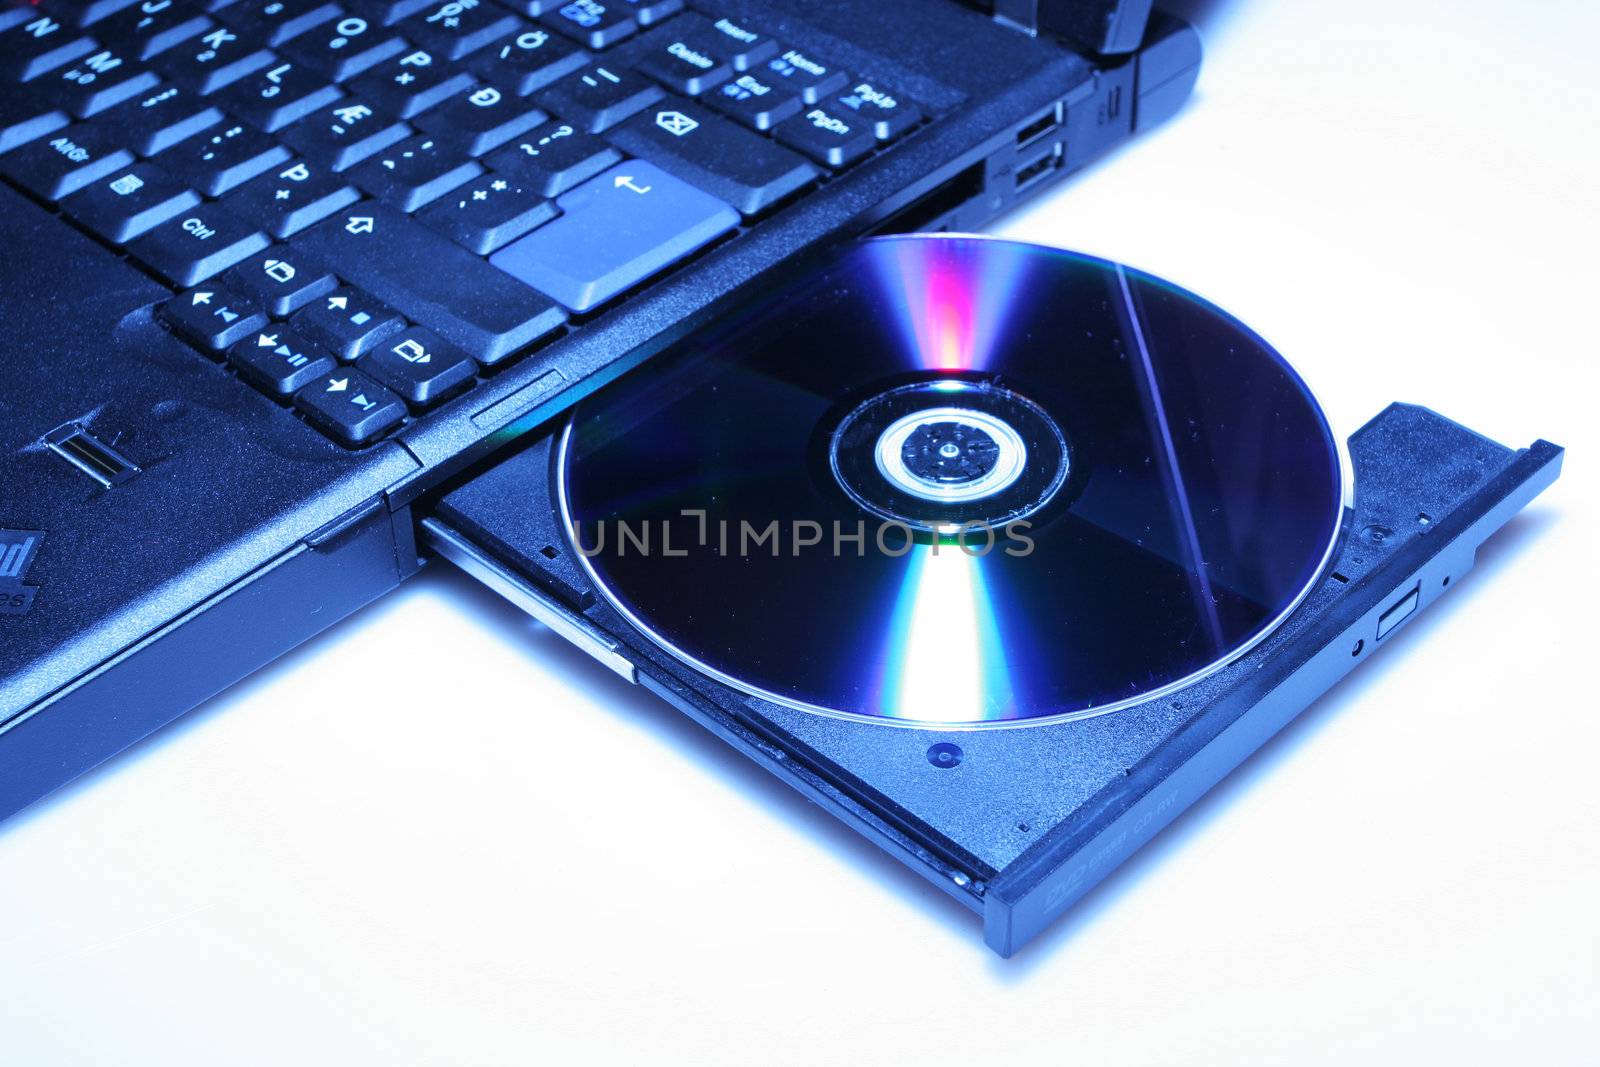 brand new laptop with cd in open cd drive, shot on white